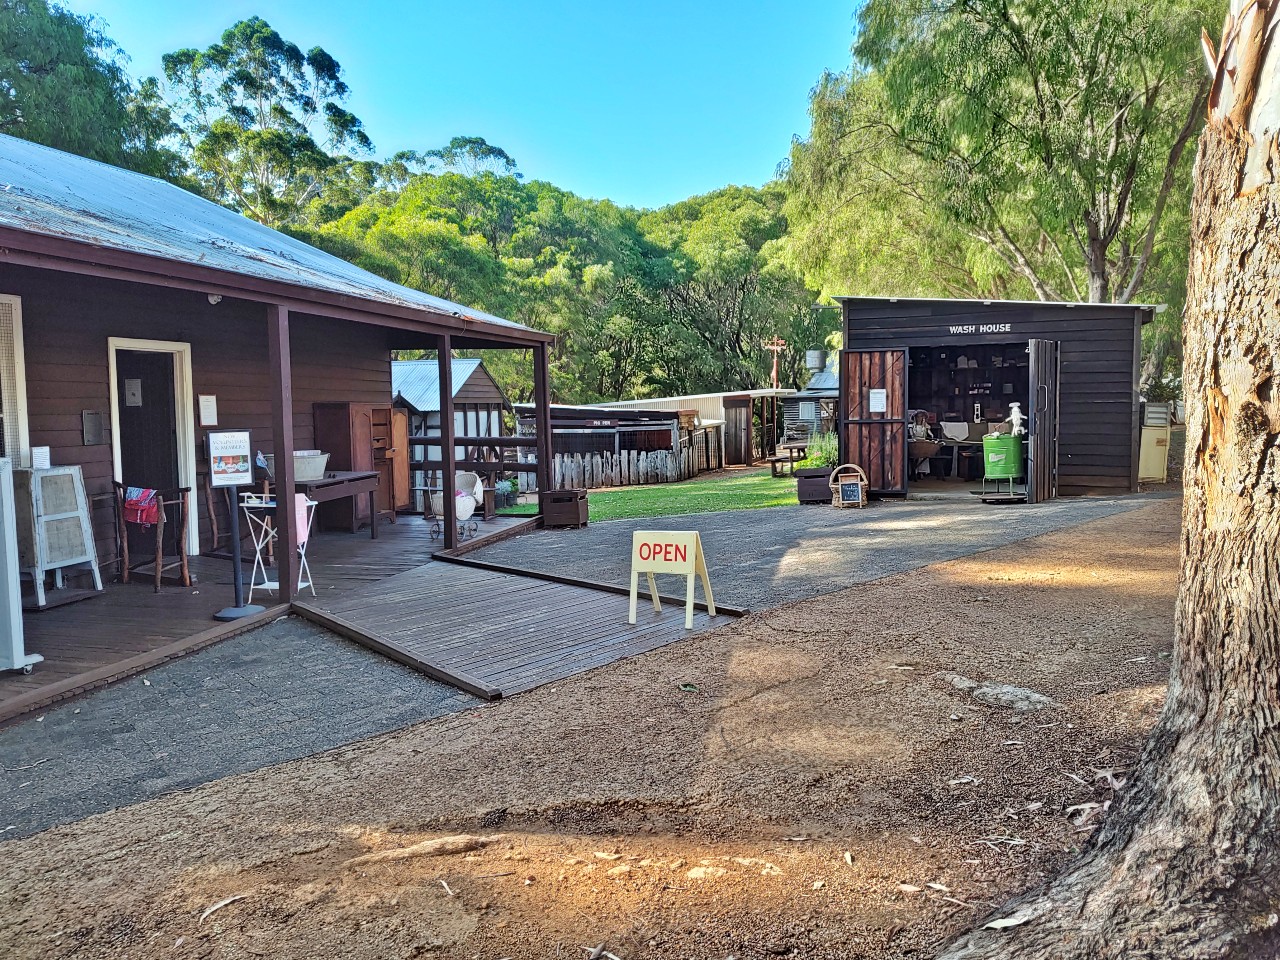 Margaret River Museum in the group settlement building and the old Bramley school